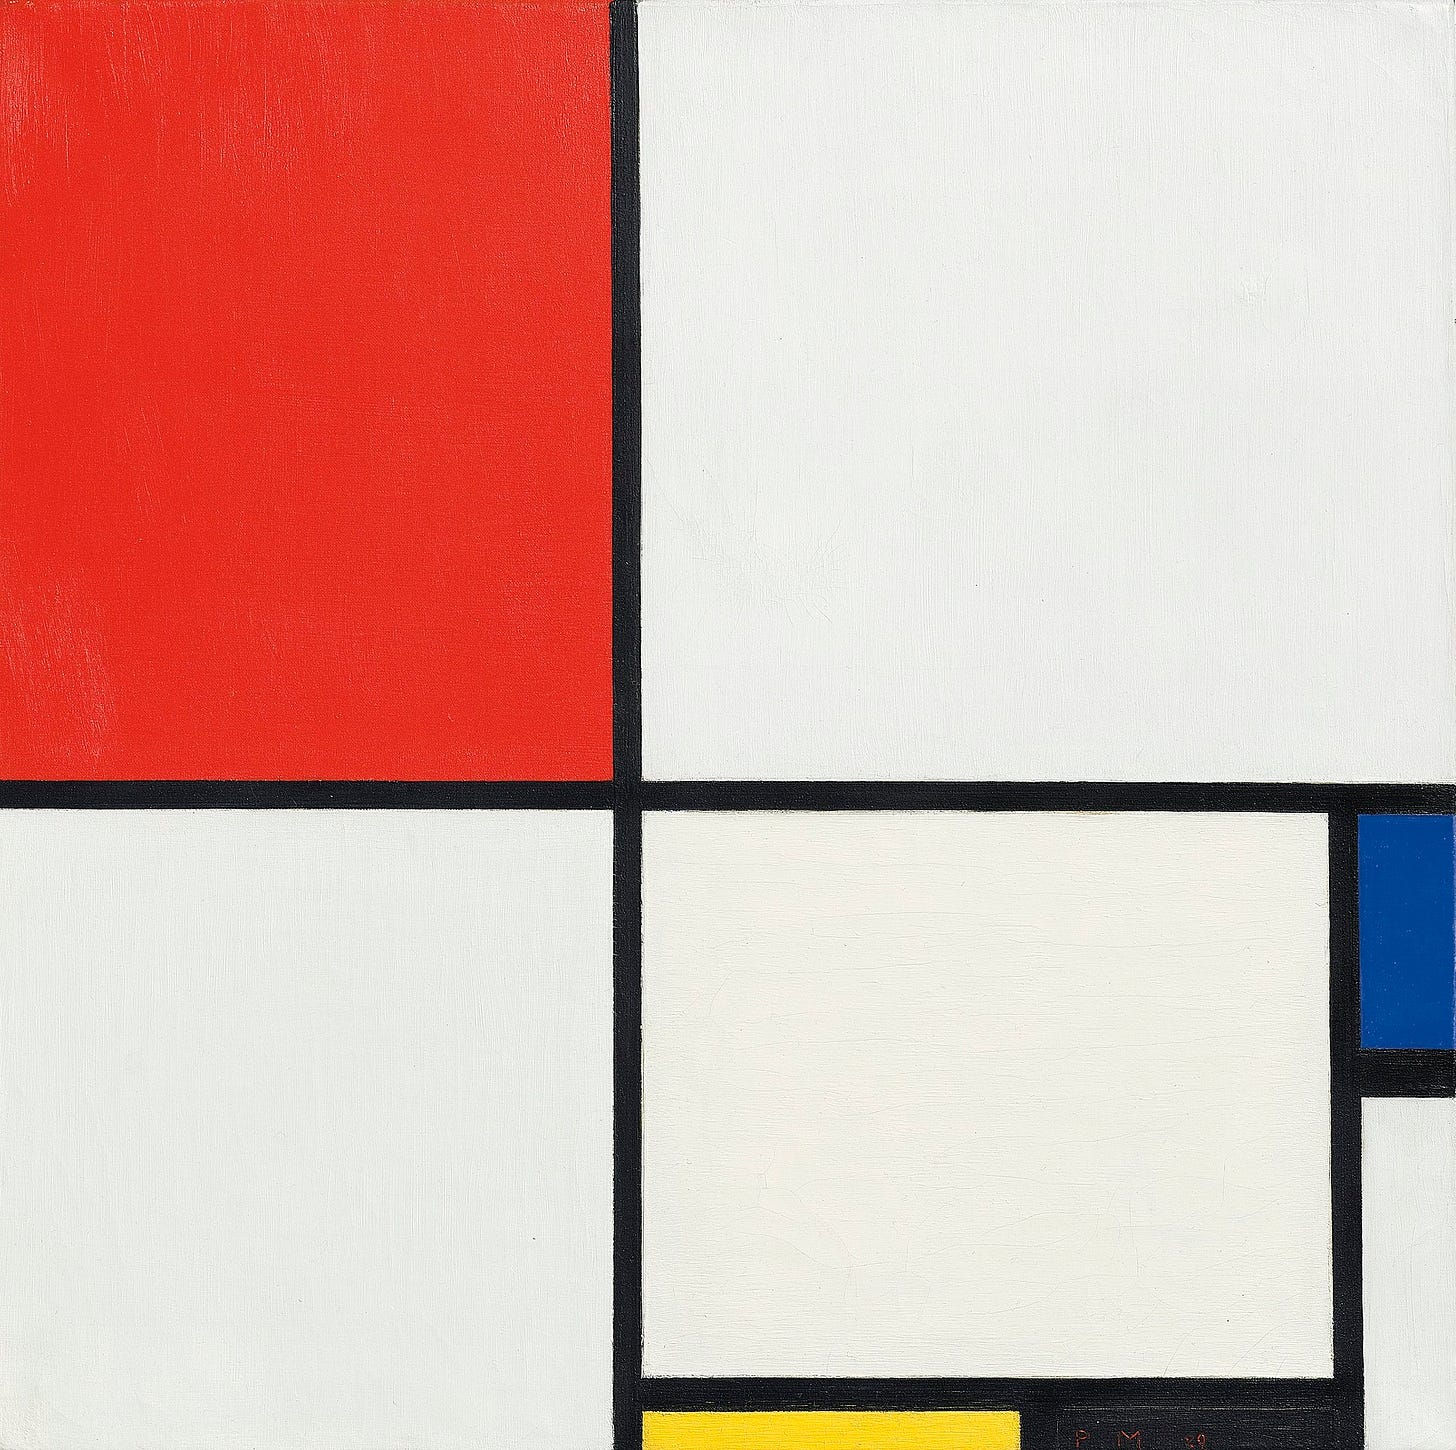 File:Piet Mondrian - Composition No. III, with red, blue, yellow and black,  1929.jpg - Wikimedia Commons